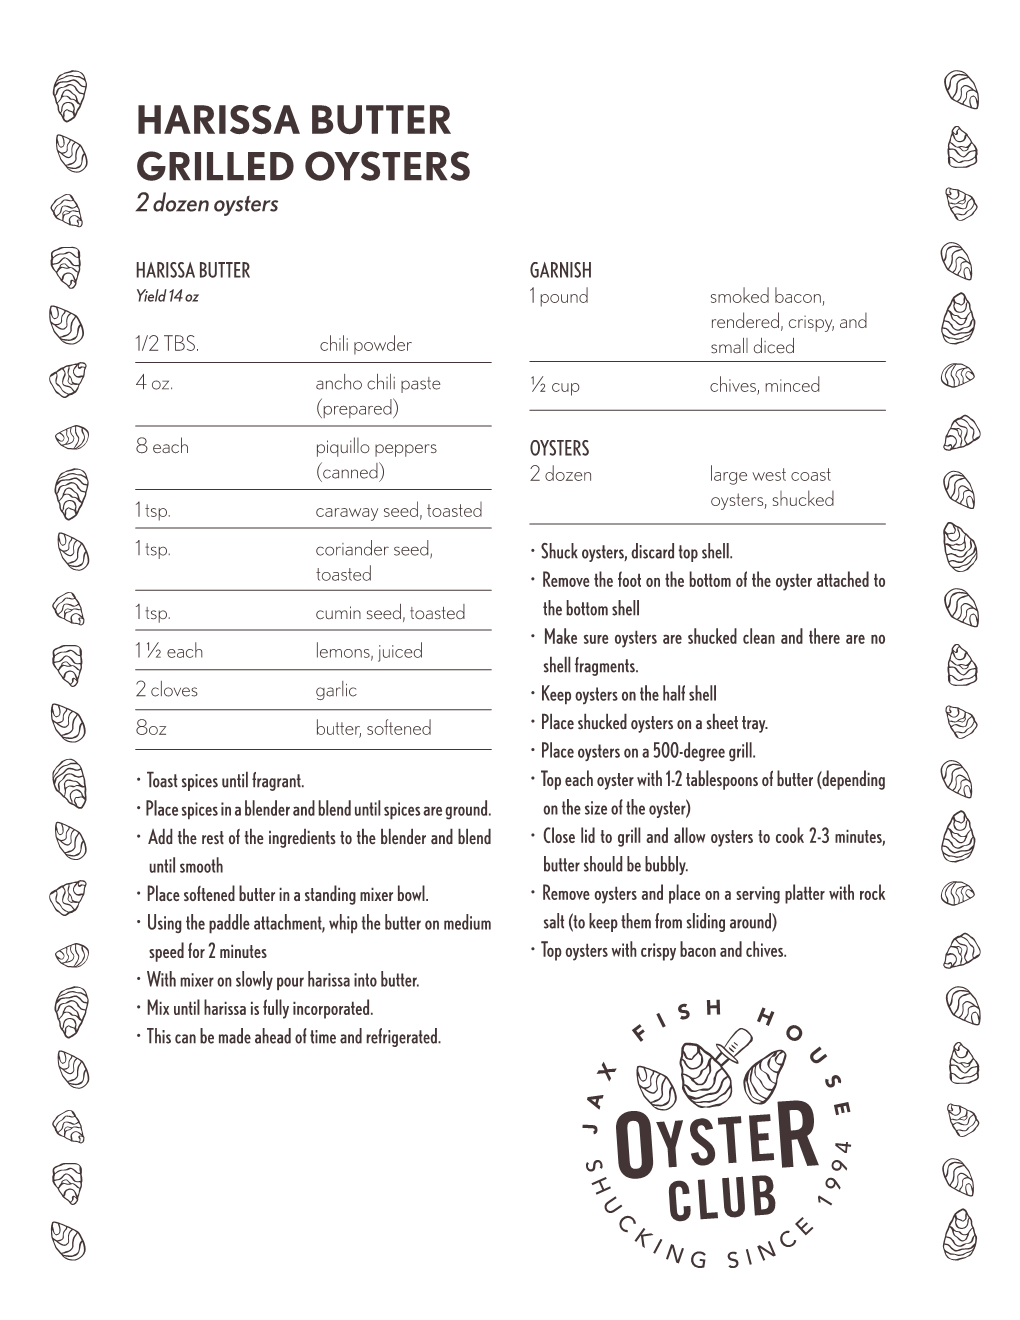 HARISSA BUTTER GRILLED OYSTERS 2 Dozen Oysters